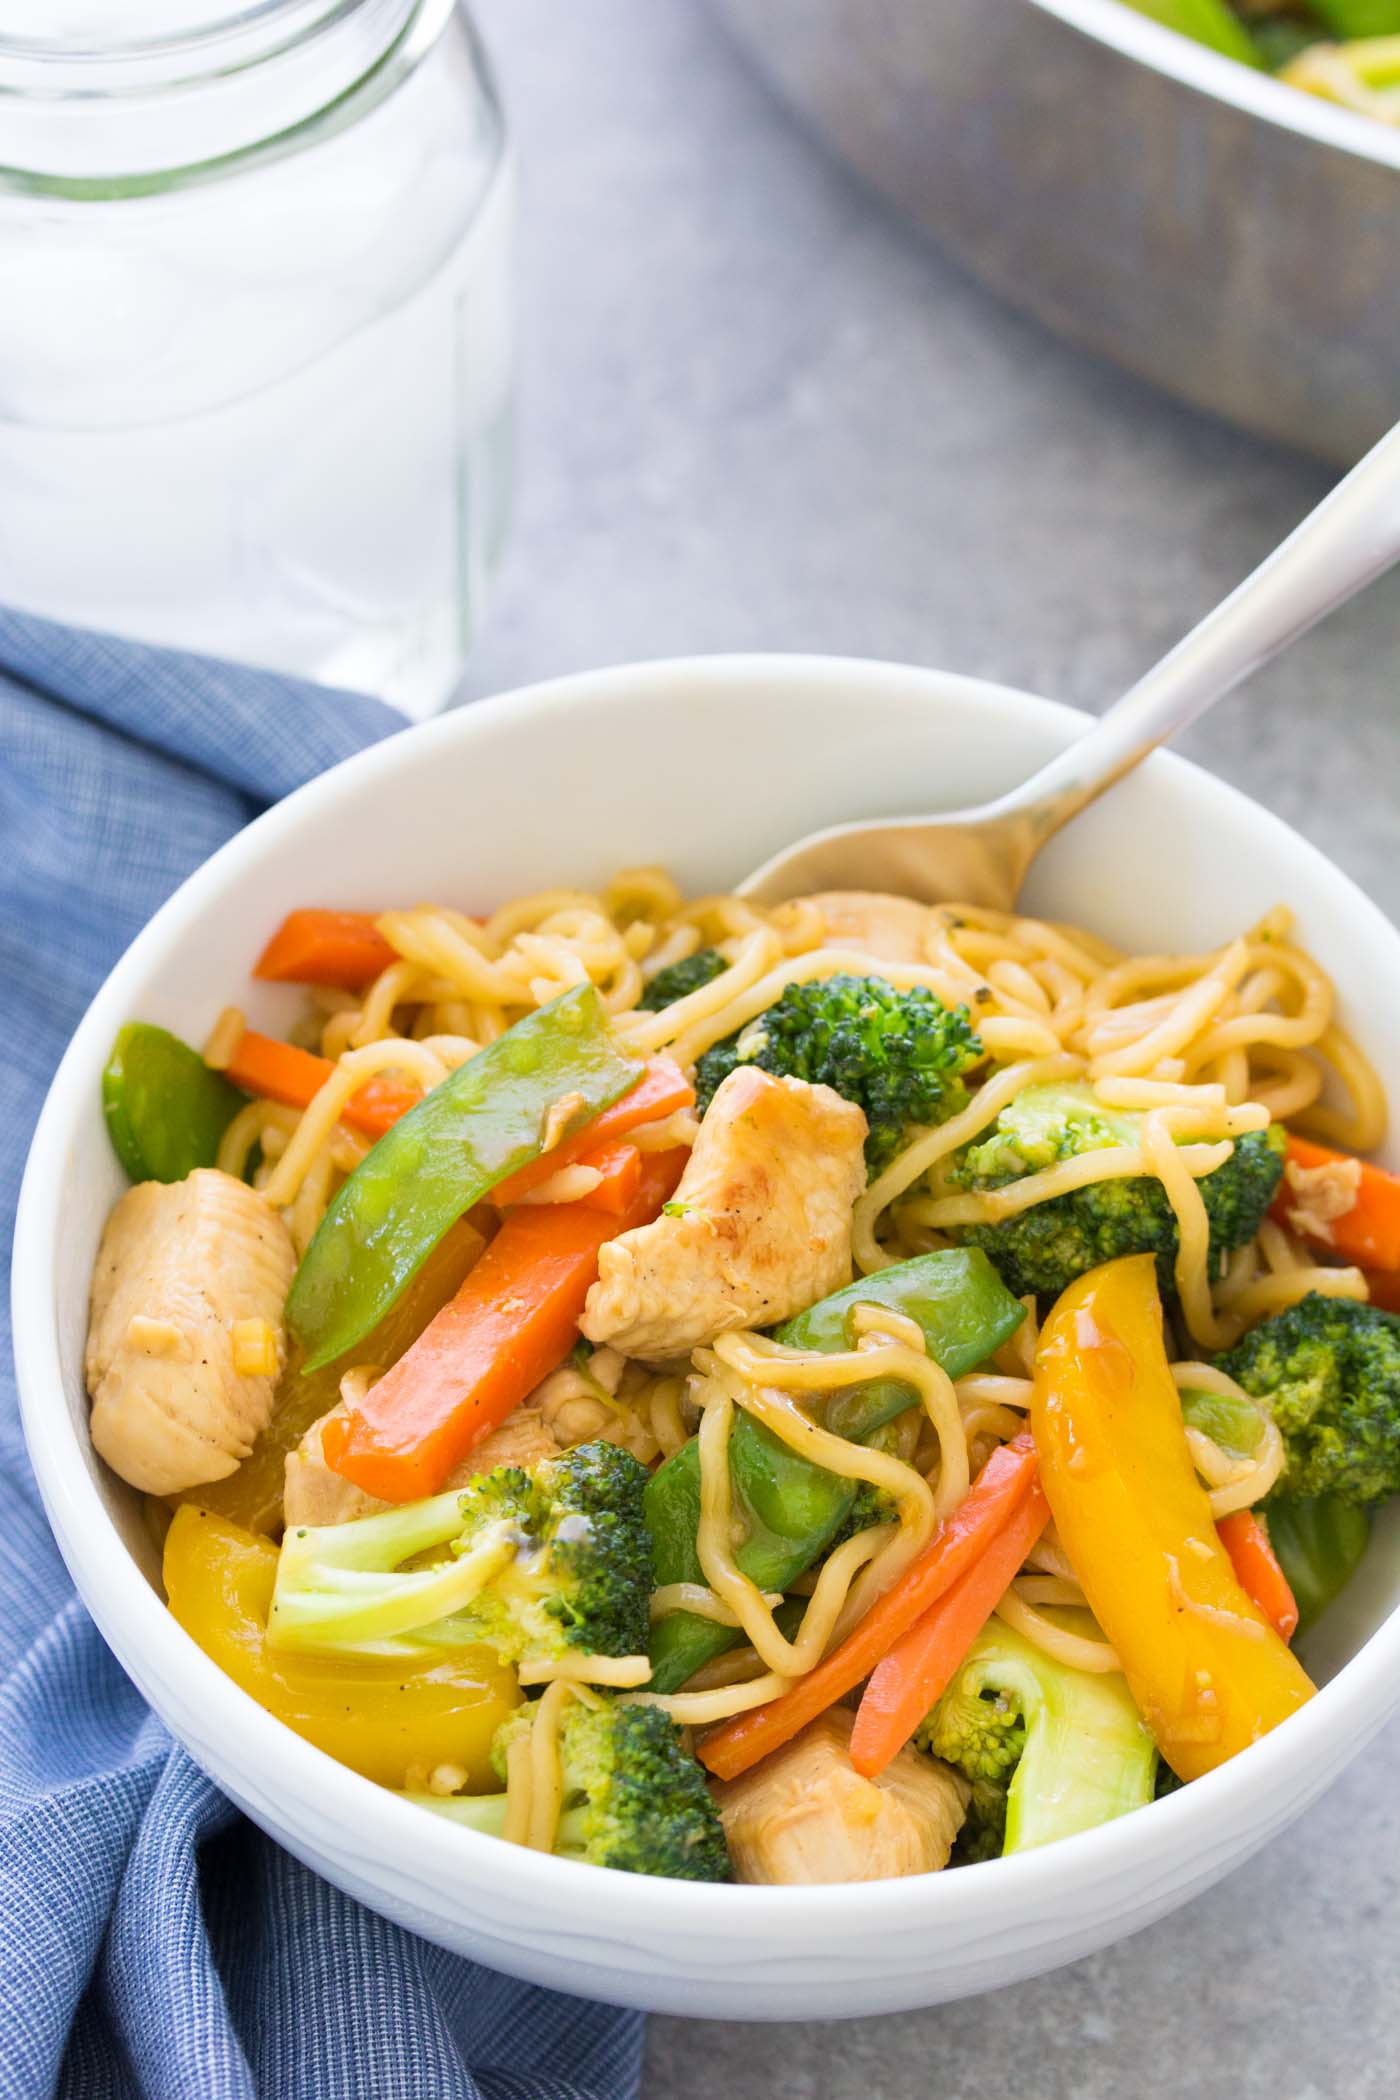 Teriyaki chicken and vegetables with noodles served in a bowl with a fork.